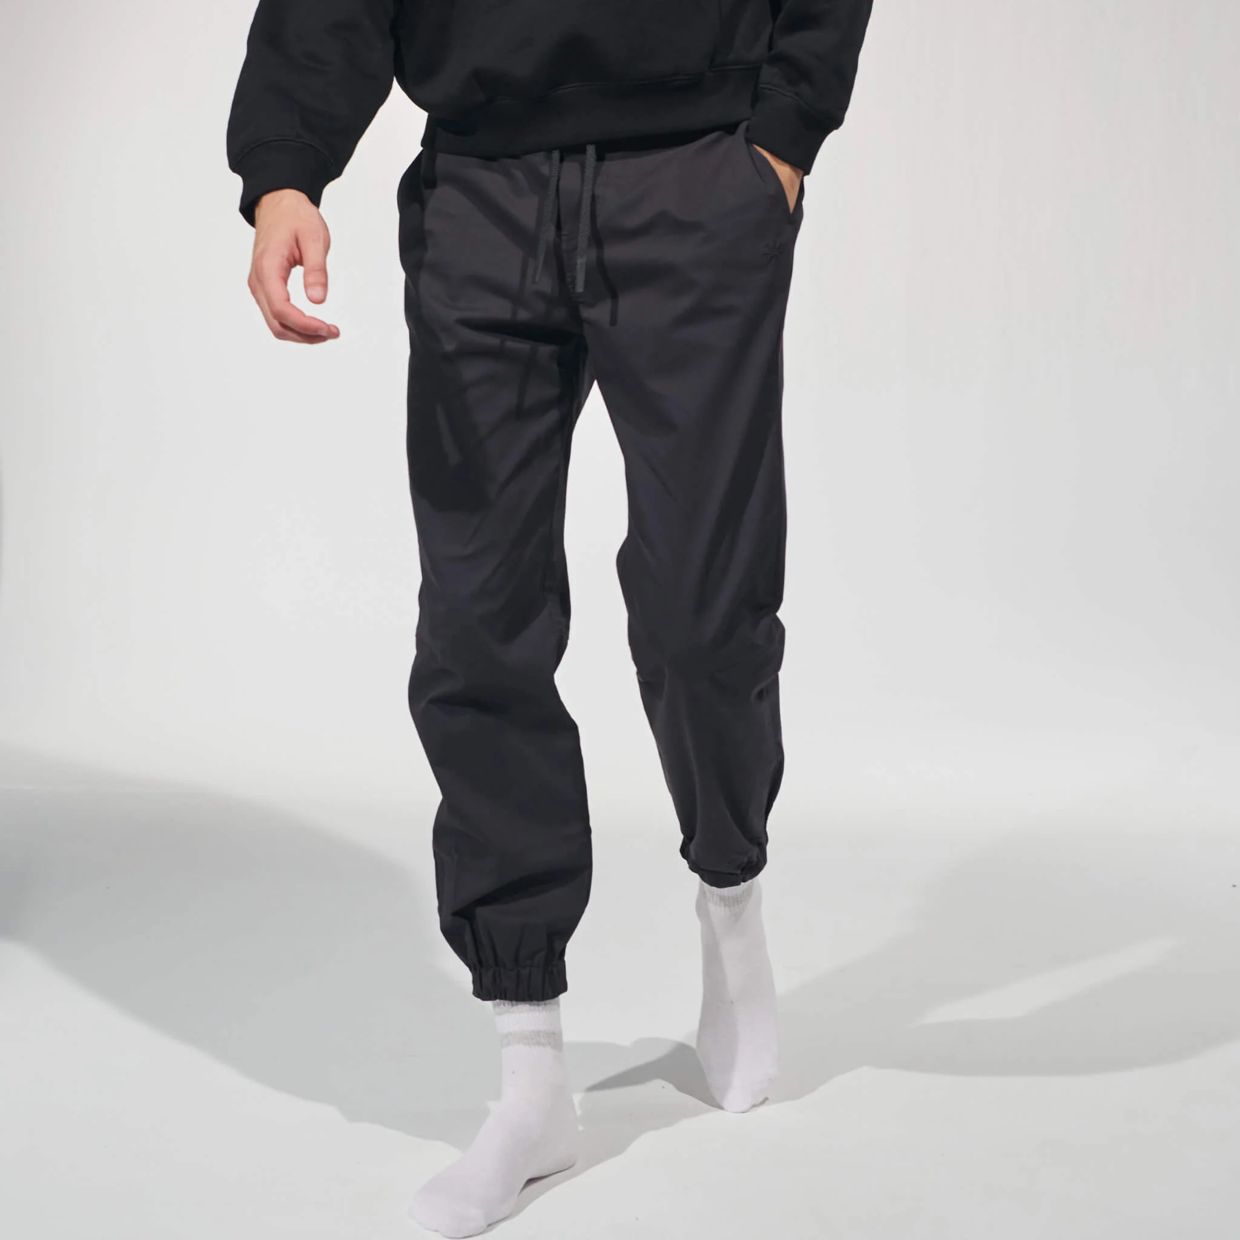 Tropicfeel Made Jogging Pants That at Great at Both Chilling and Trekking